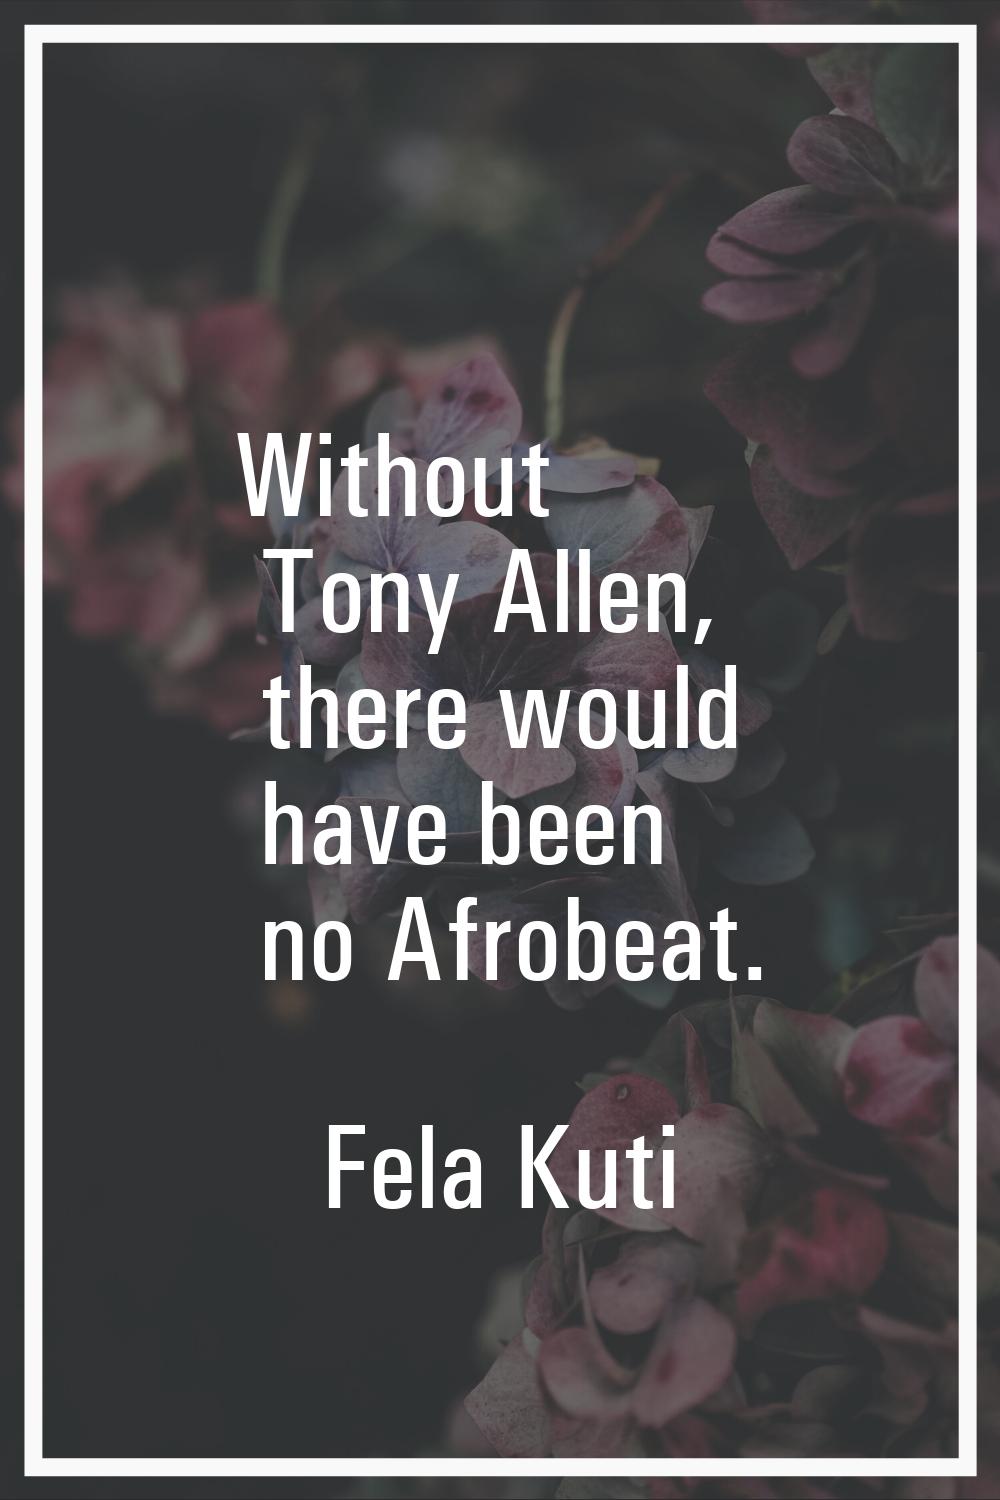 Without Tony Allen, there would have been no Afrobeat.